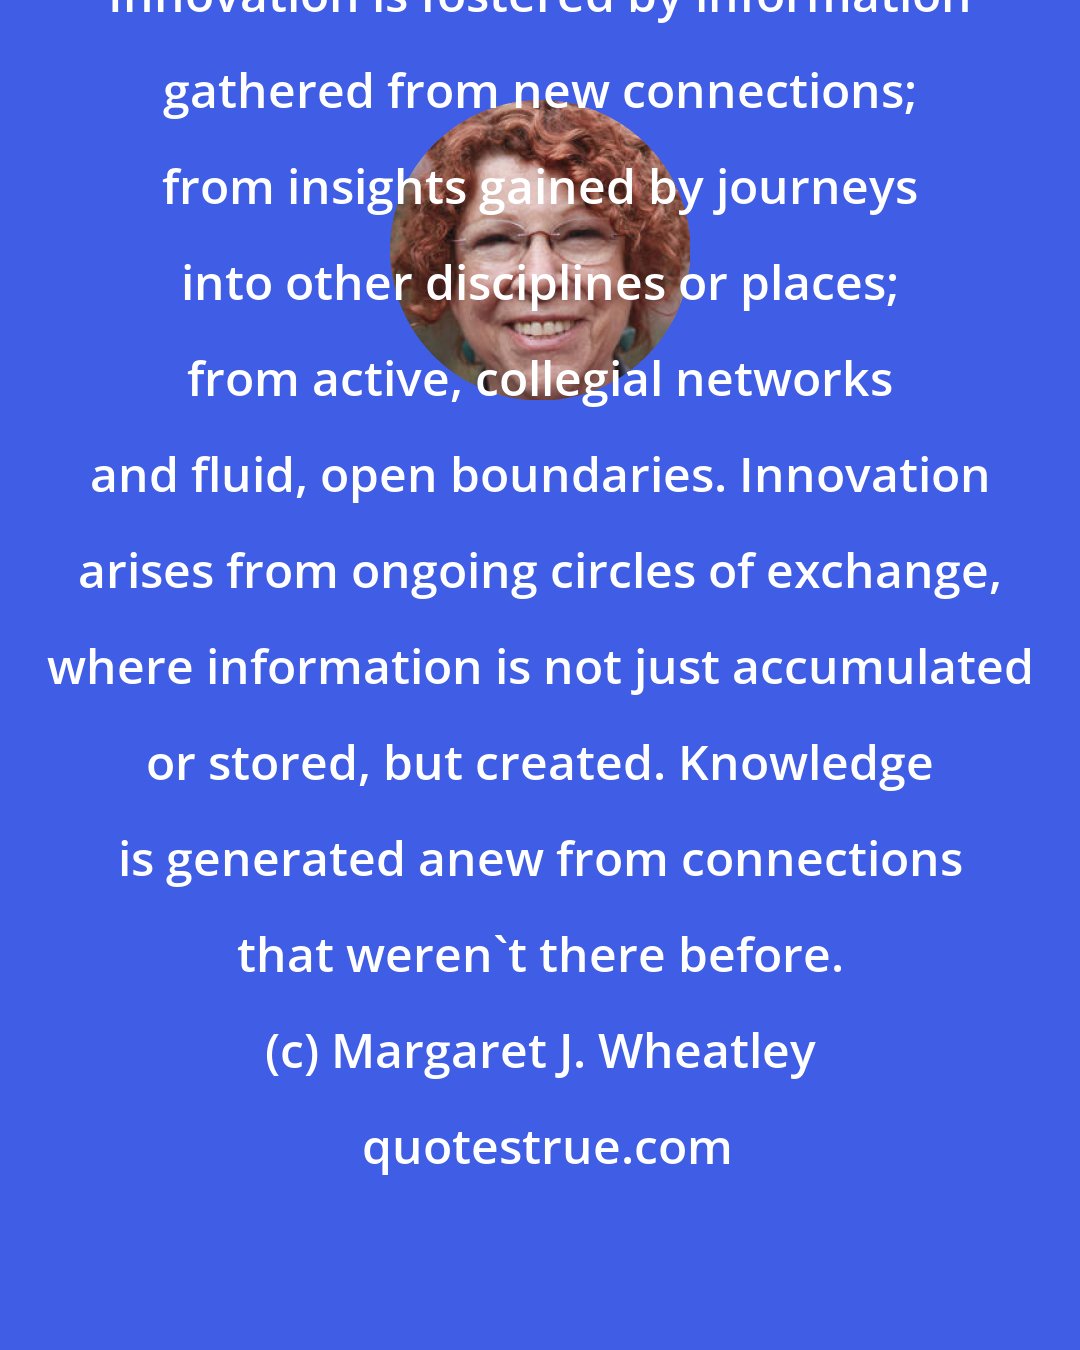 Margaret J. Wheatley: Innovation is fostered by information gathered from new connections; from insights gained by journeys into other disciplines or places; from active, collegial networks and fluid, open boundaries. Innovation arises from ongoing circles of exchange, where information is not just accumulated or stored, but created. Knowledge is generated anew from connections that weren't there before.